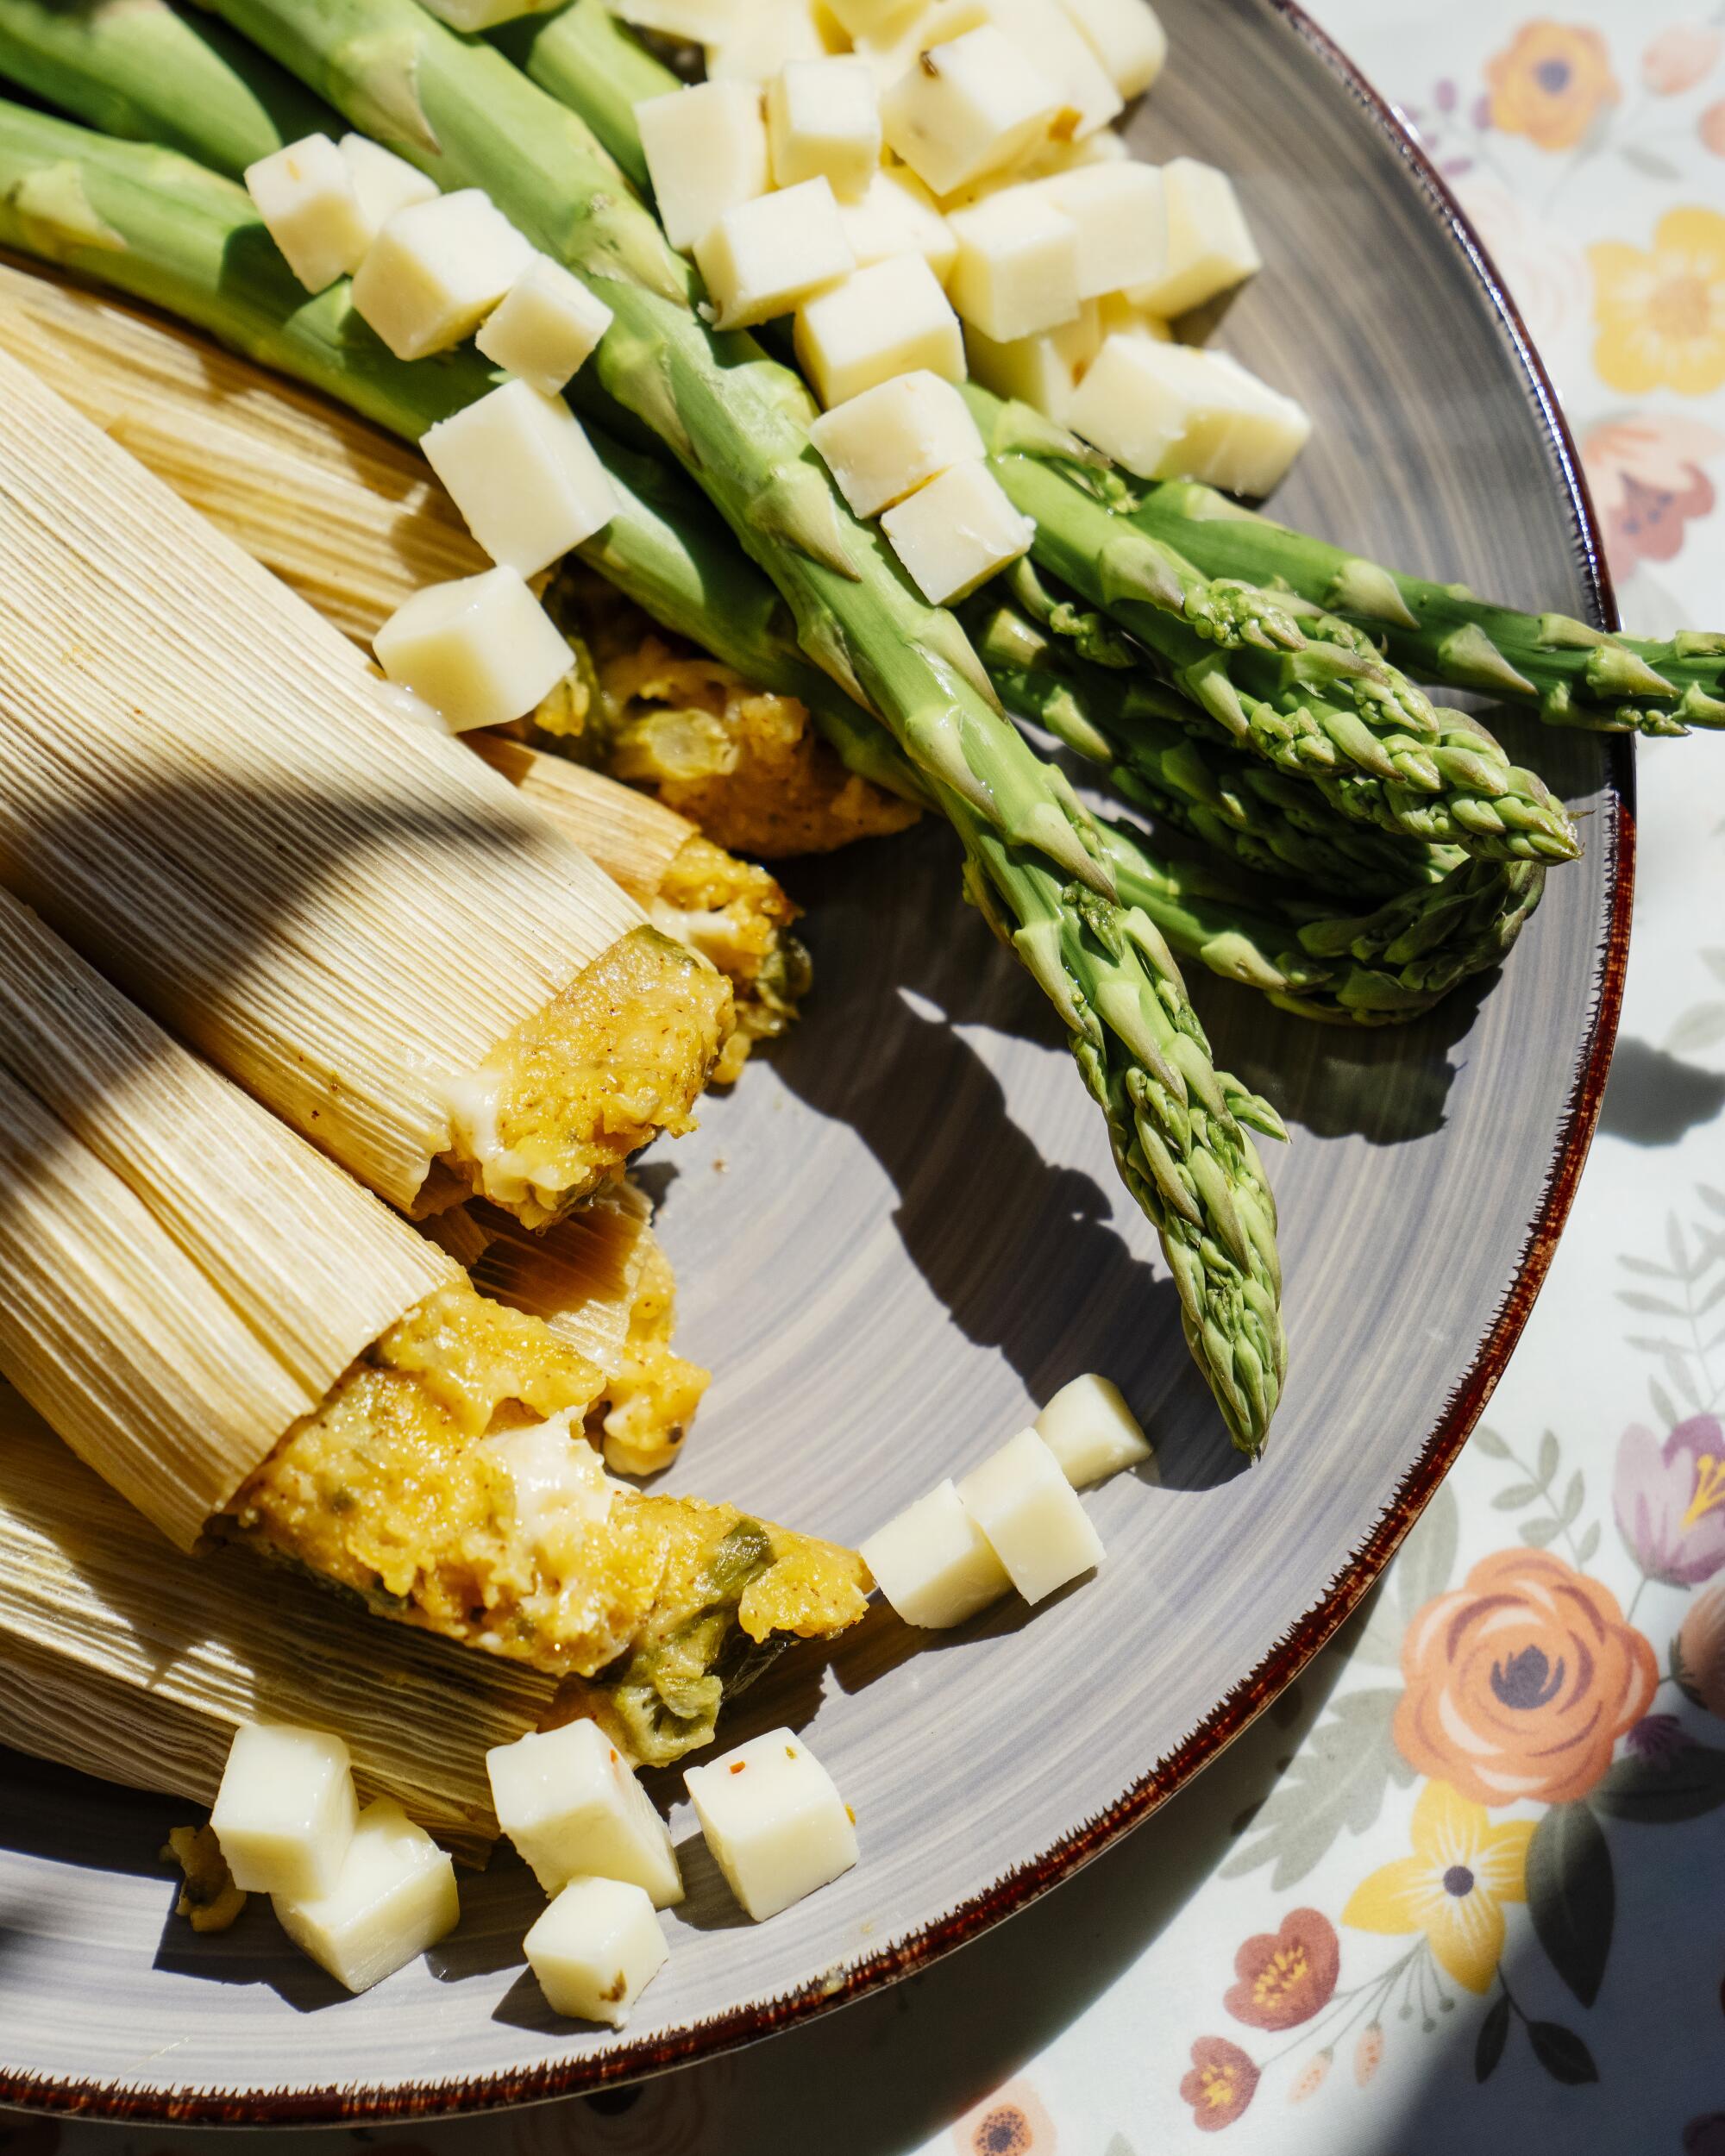 Asparagus and pepperjack cheese tamales are a seasonal specialty of Los Hernandez Tamales in Union Gap, Wash.